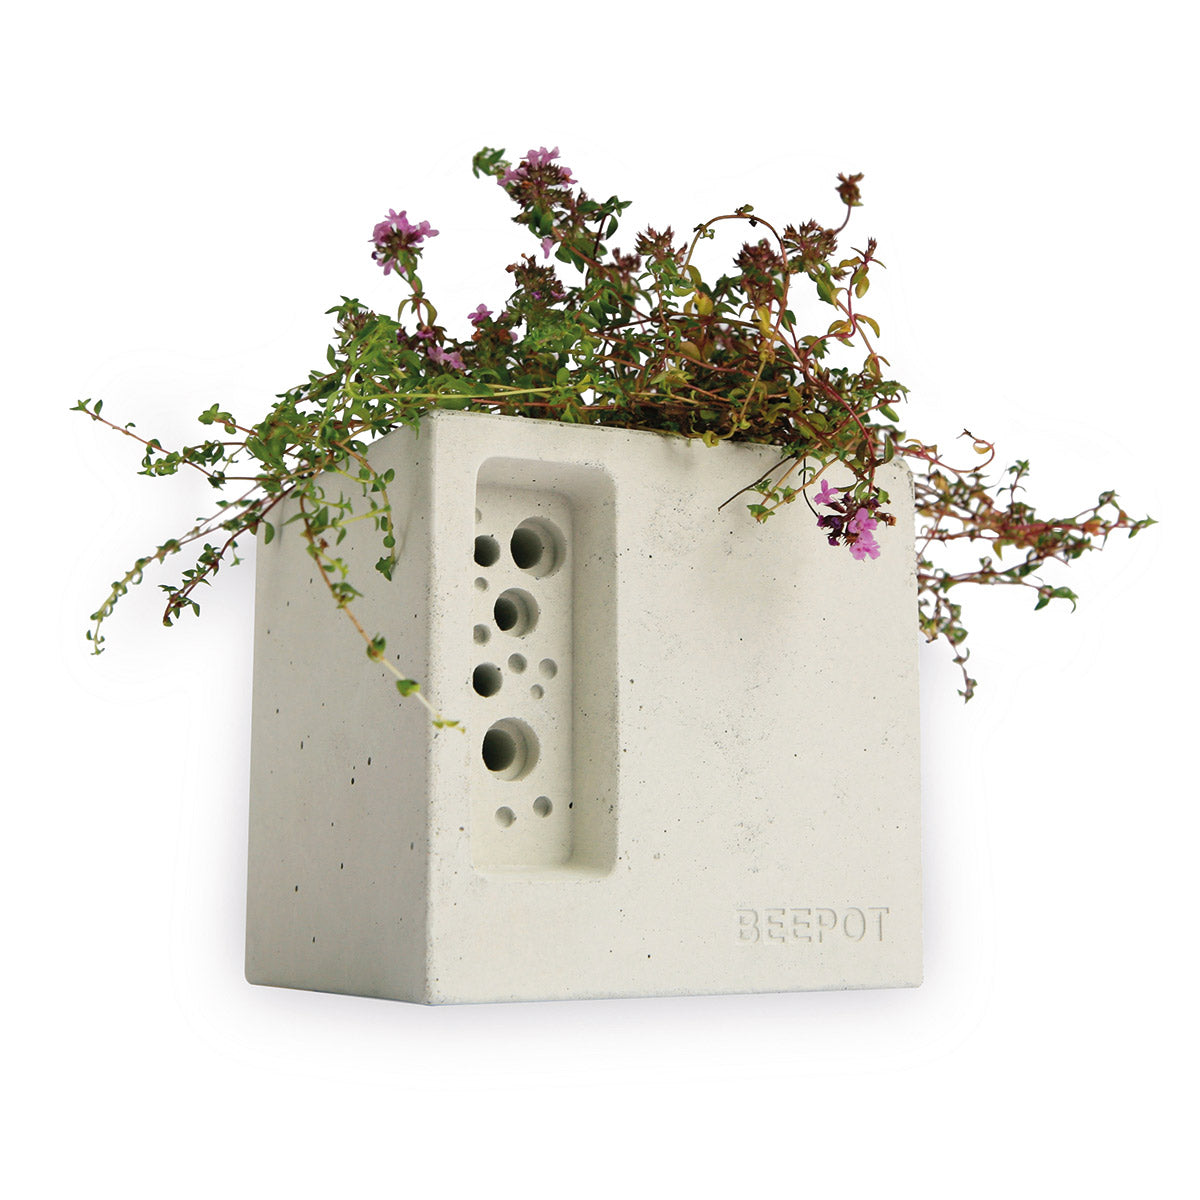 A purple-flowered plant in a white plant pot bee brick set